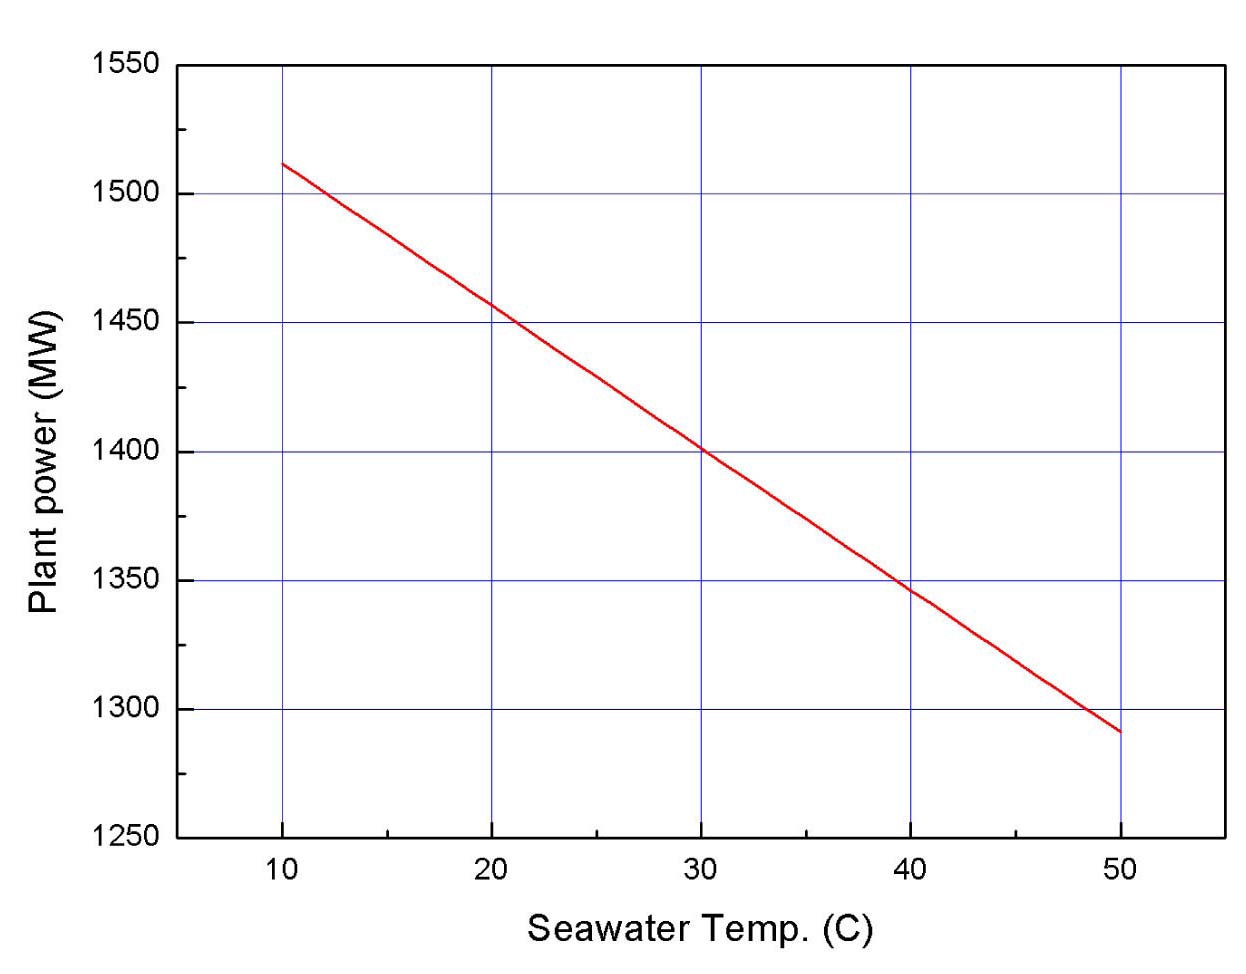 Electric Power Output for Varying Sea Water Temperature